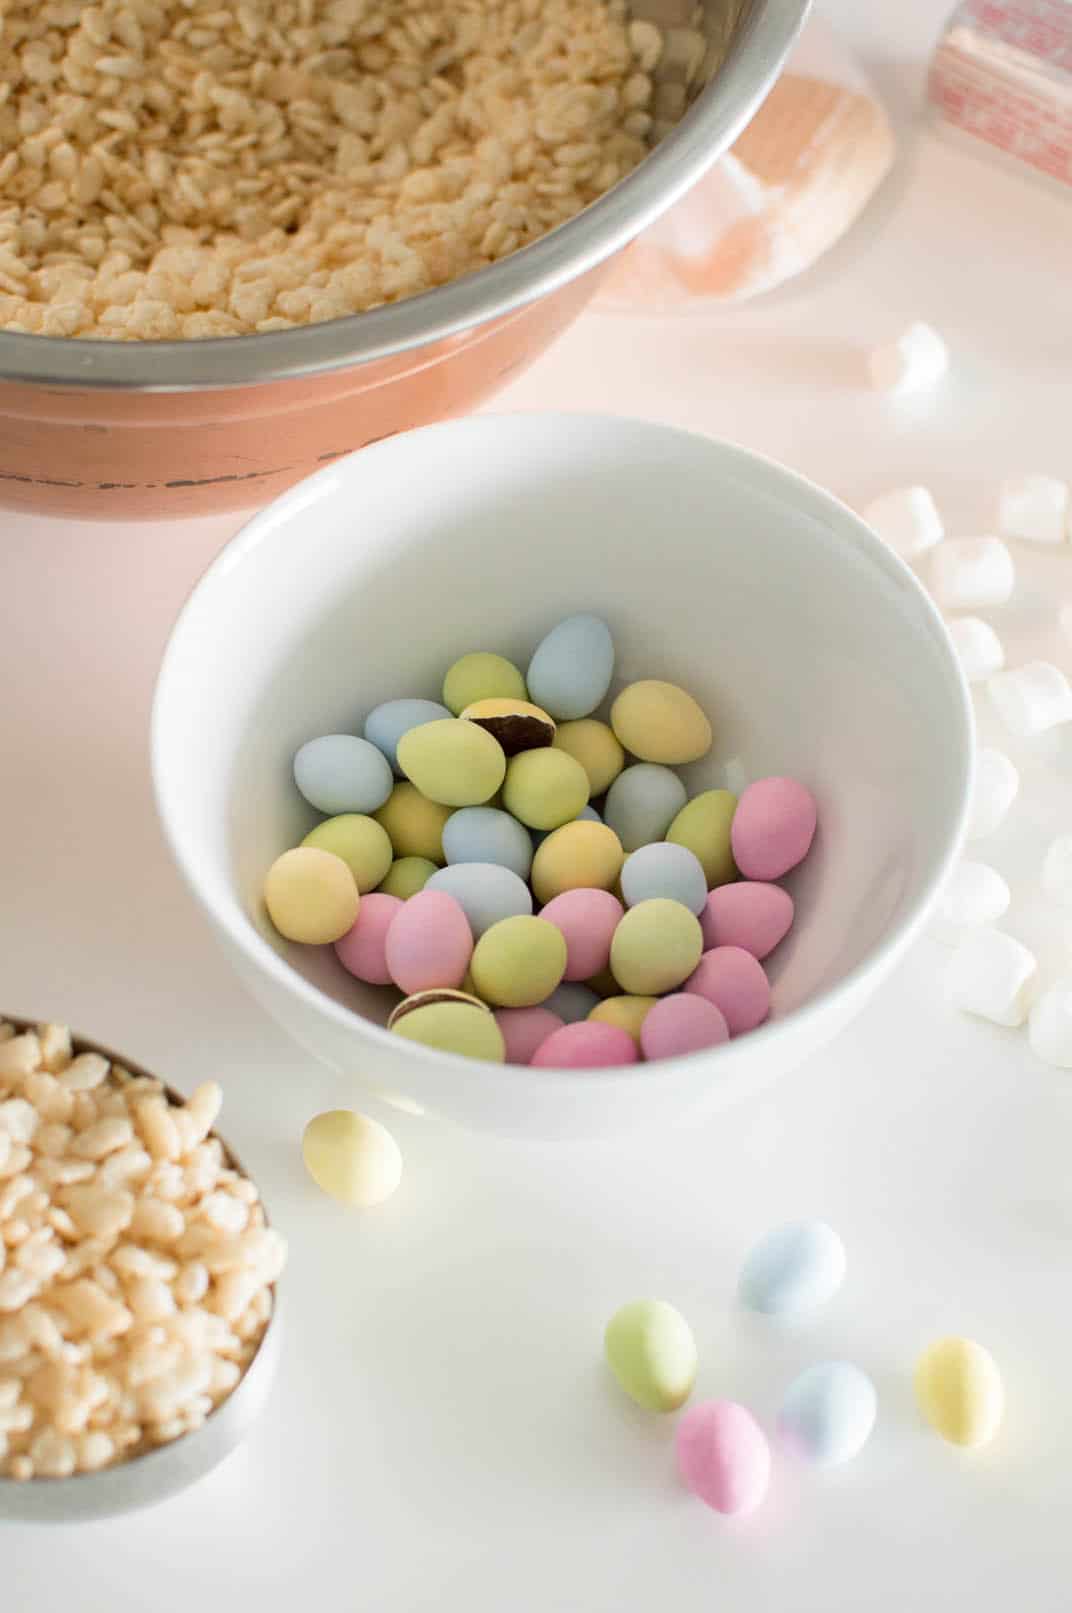 Mini Egg candies in a white bowl surrounded by other ingredients